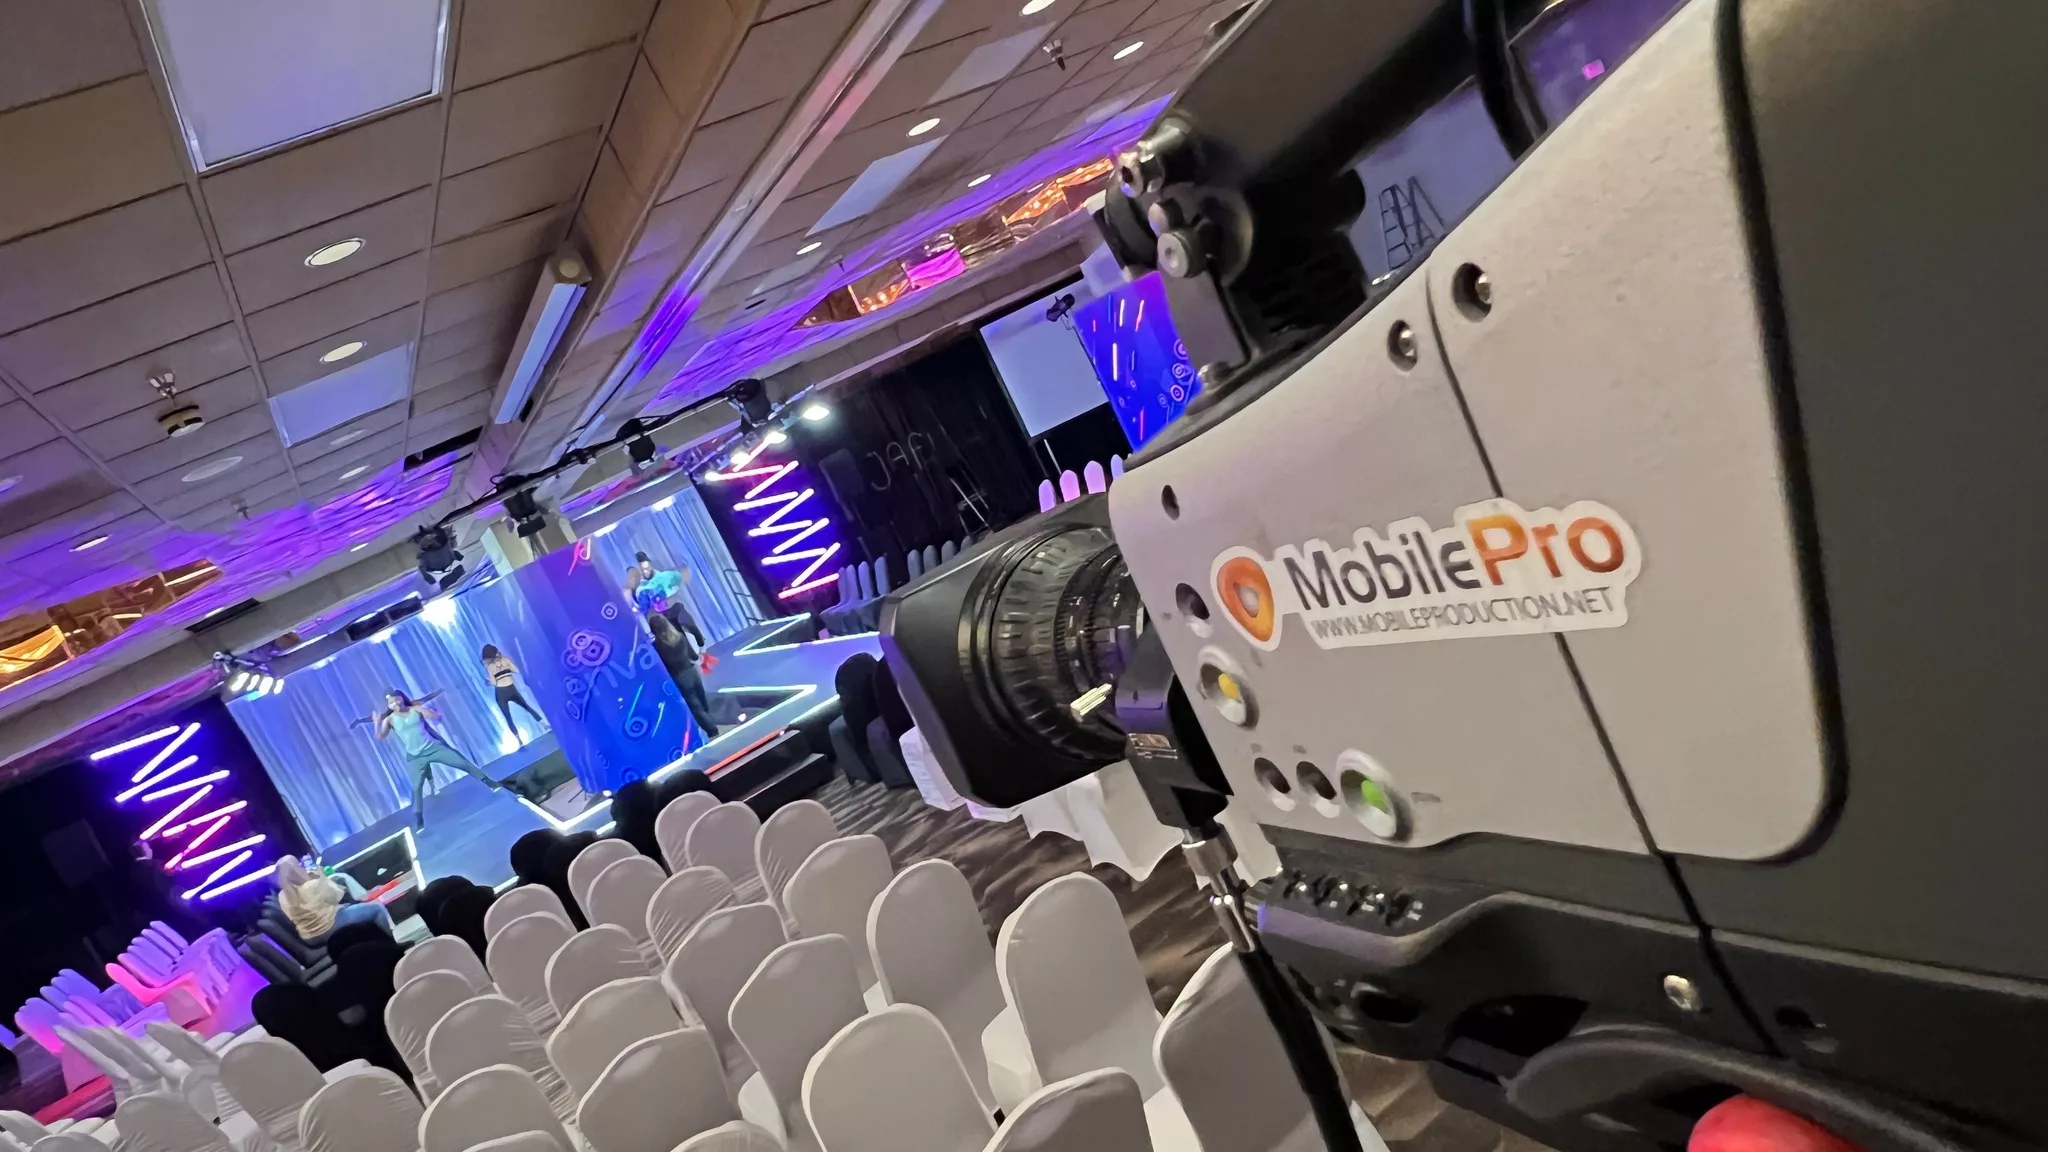 Mobile Pro Strengthens its team with the Addition of Three Team Members